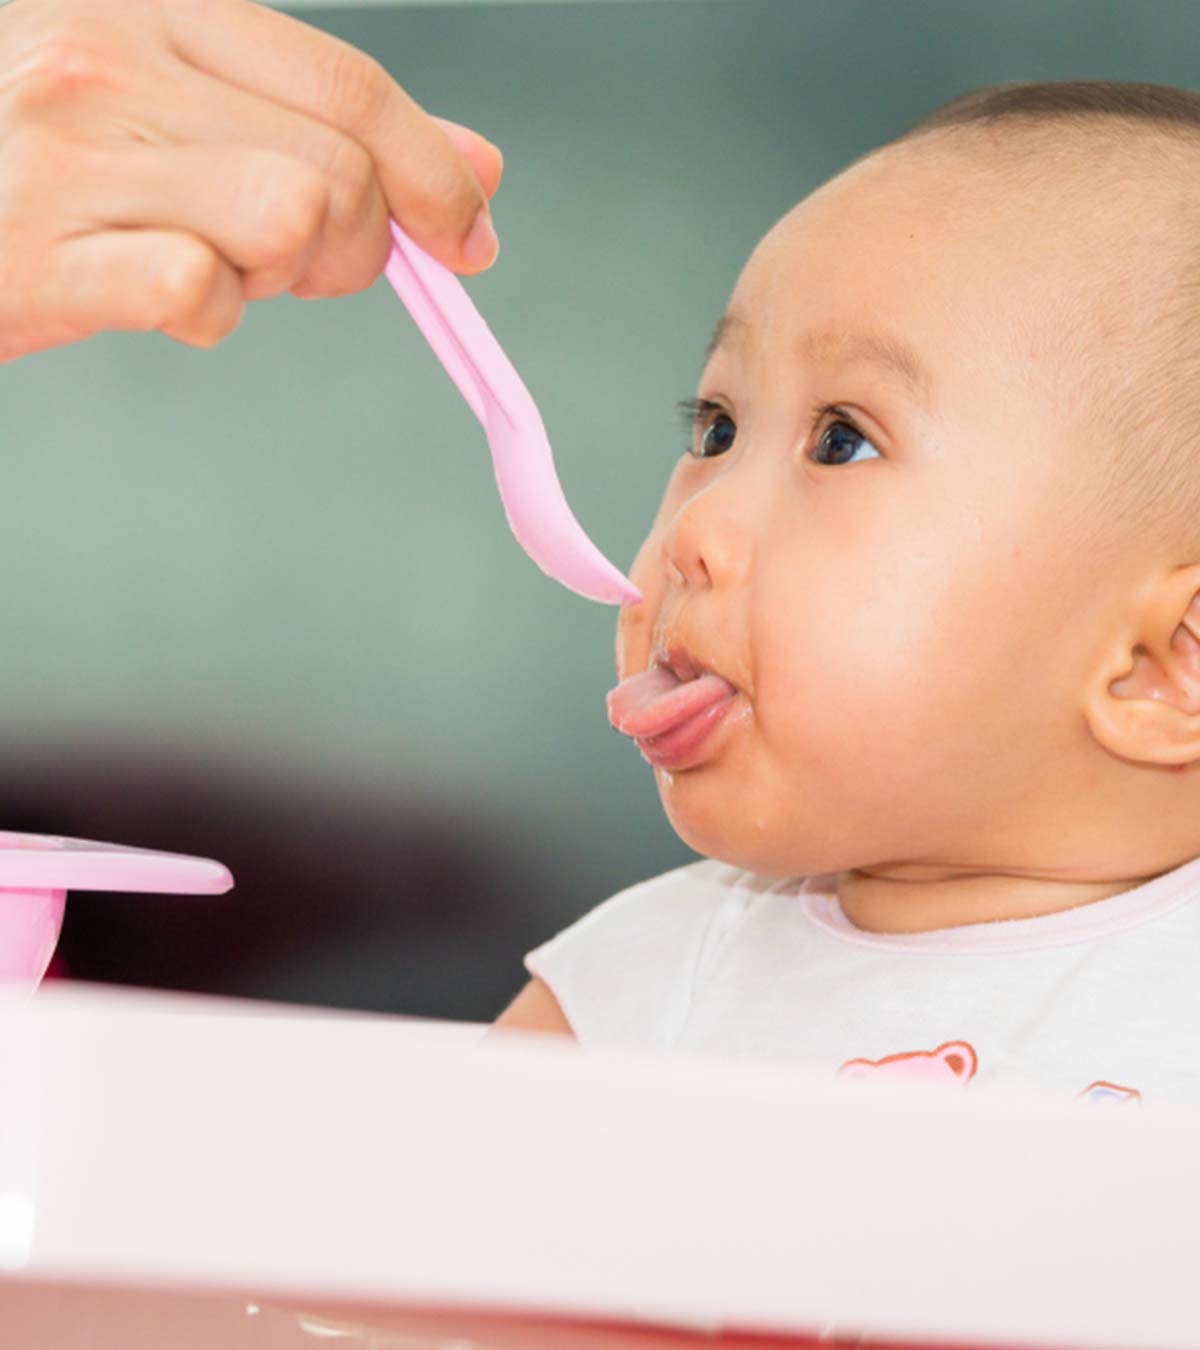 Baby Gagging: Reasons, Prevention And When To Worry